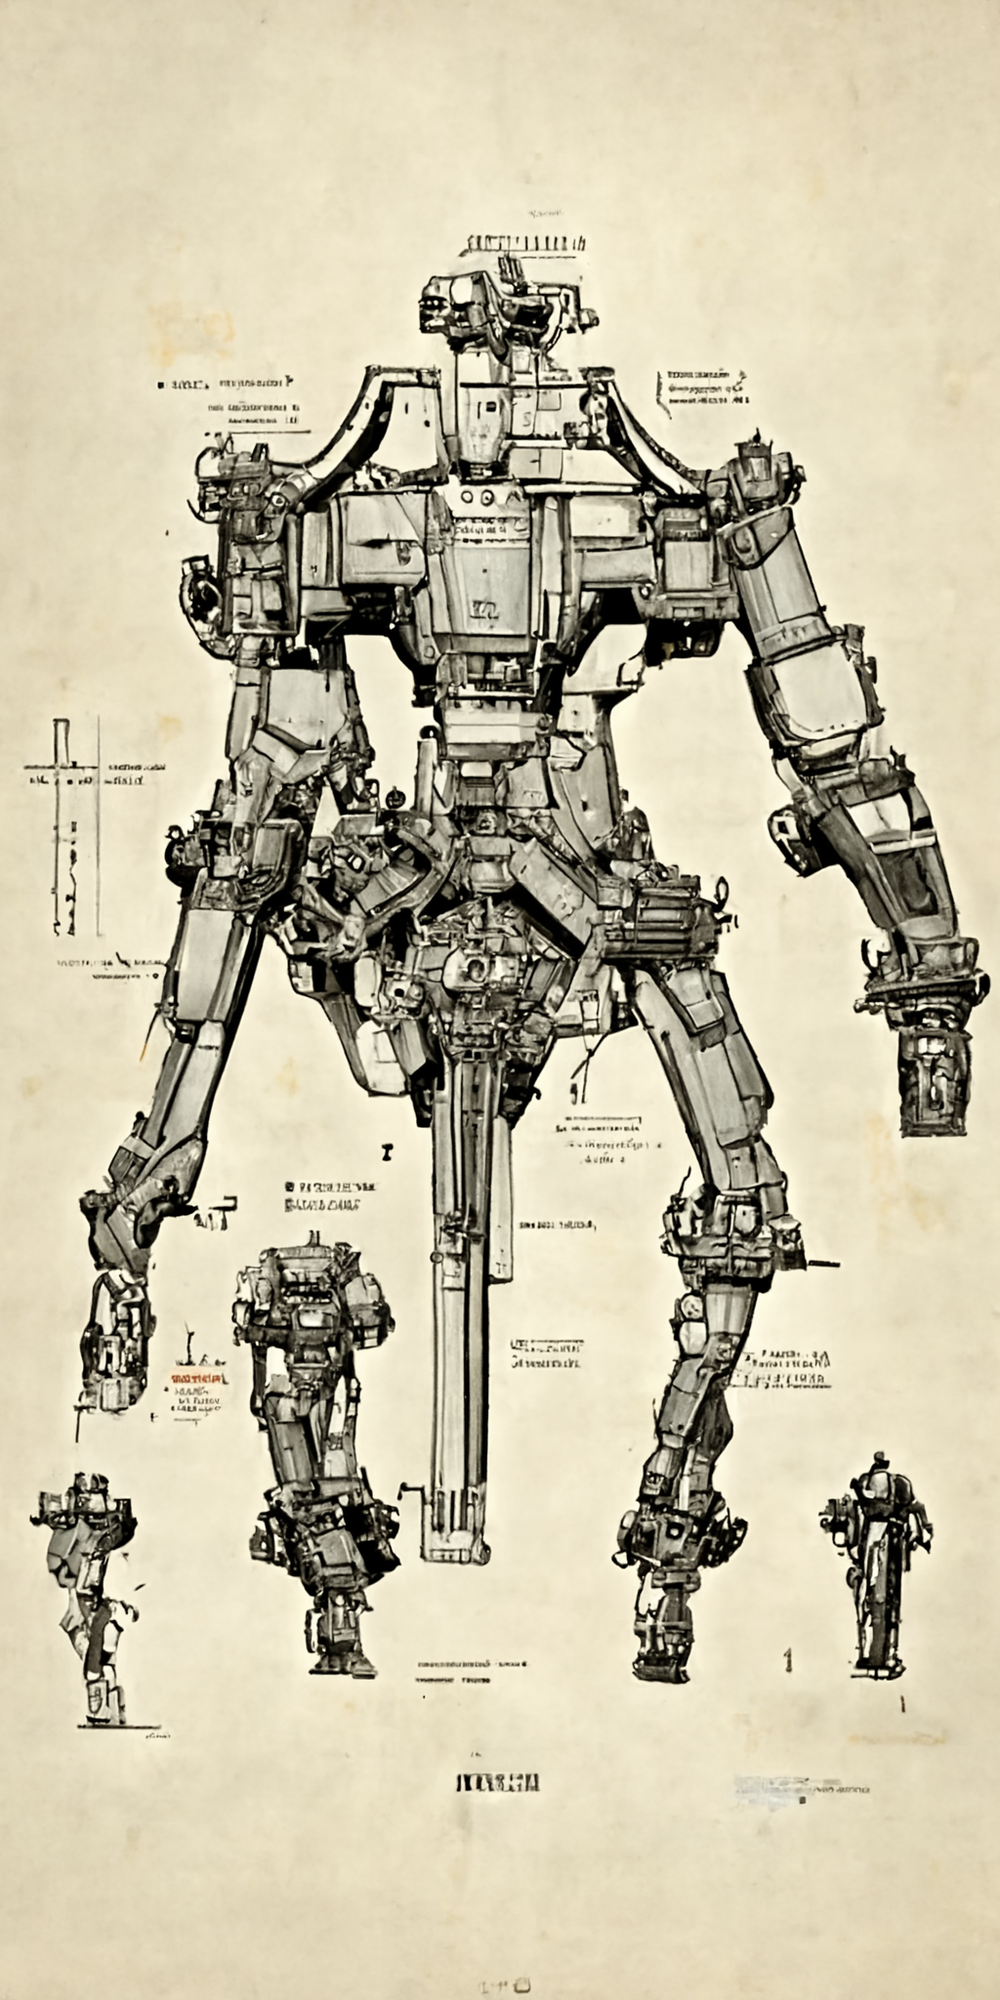 Berserkerface_very_technical_and_detailed_blueprint_of_a_Bipeda_7f12a8d1-3f18-4b94-8255-a46651c8d4fc.png